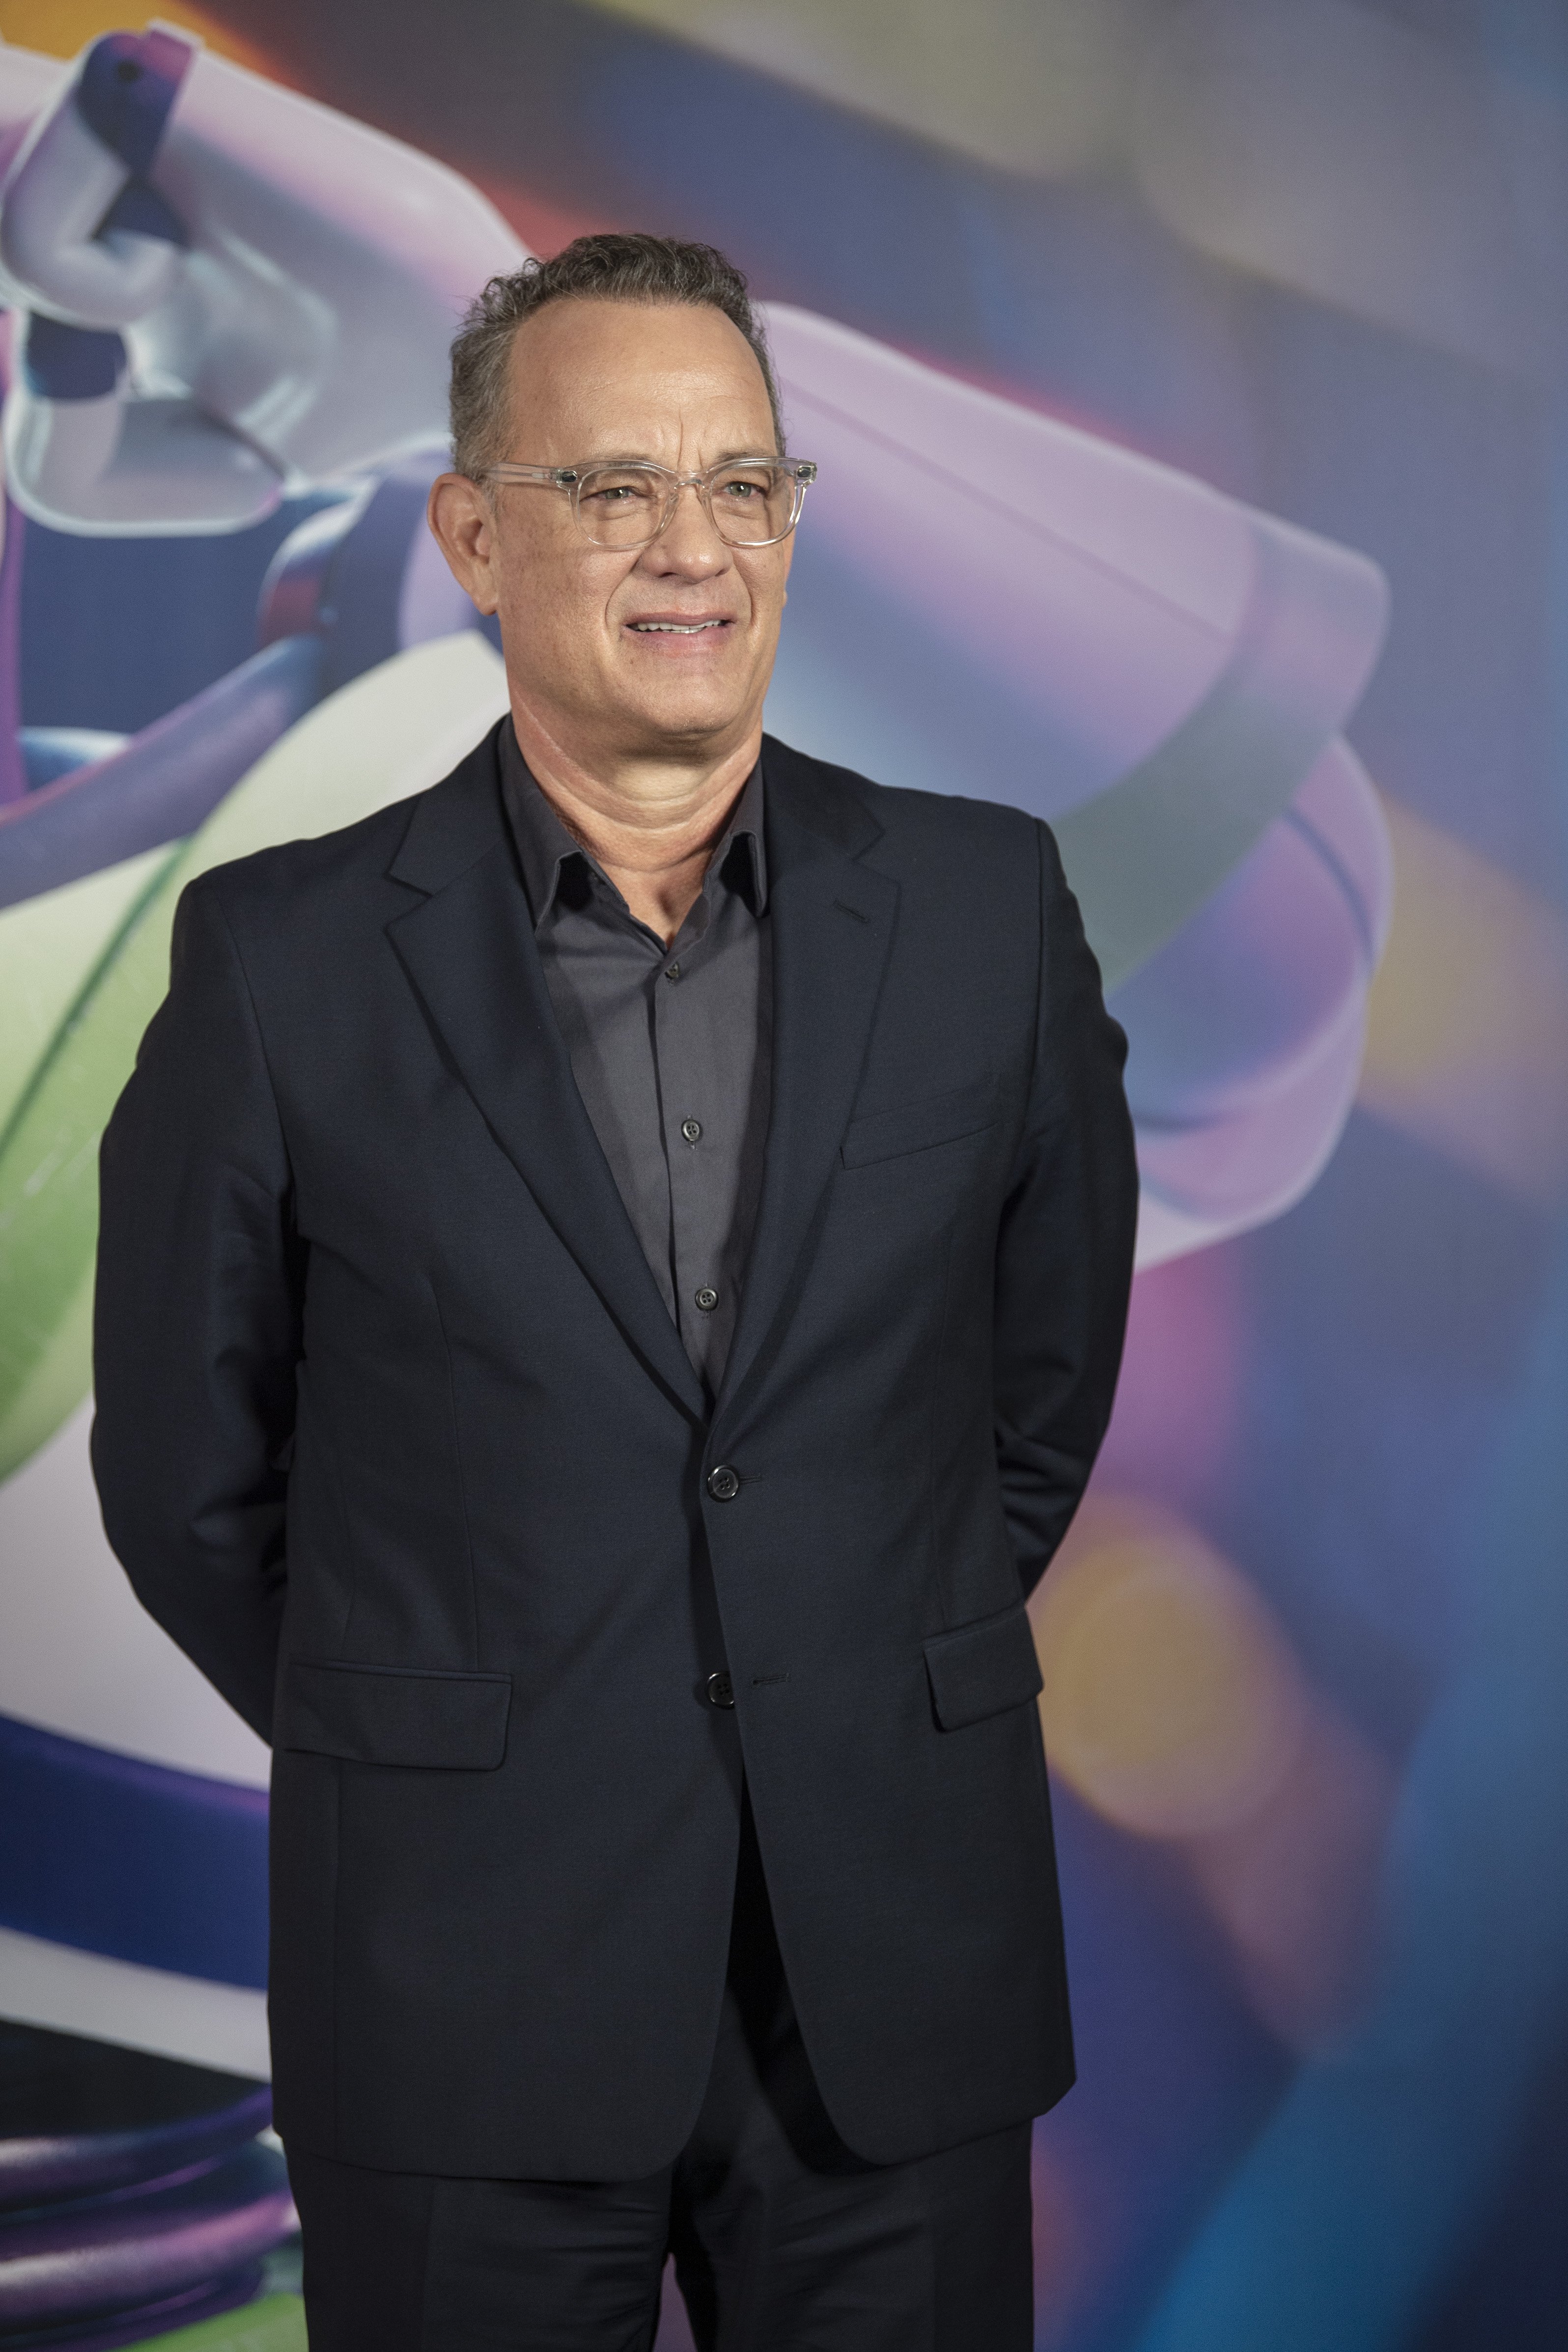 Tom Hanks attends the "Toy Story 4" movie photocall in Barcelona, Spain, on June 19, 2019. | Source: Getty Images